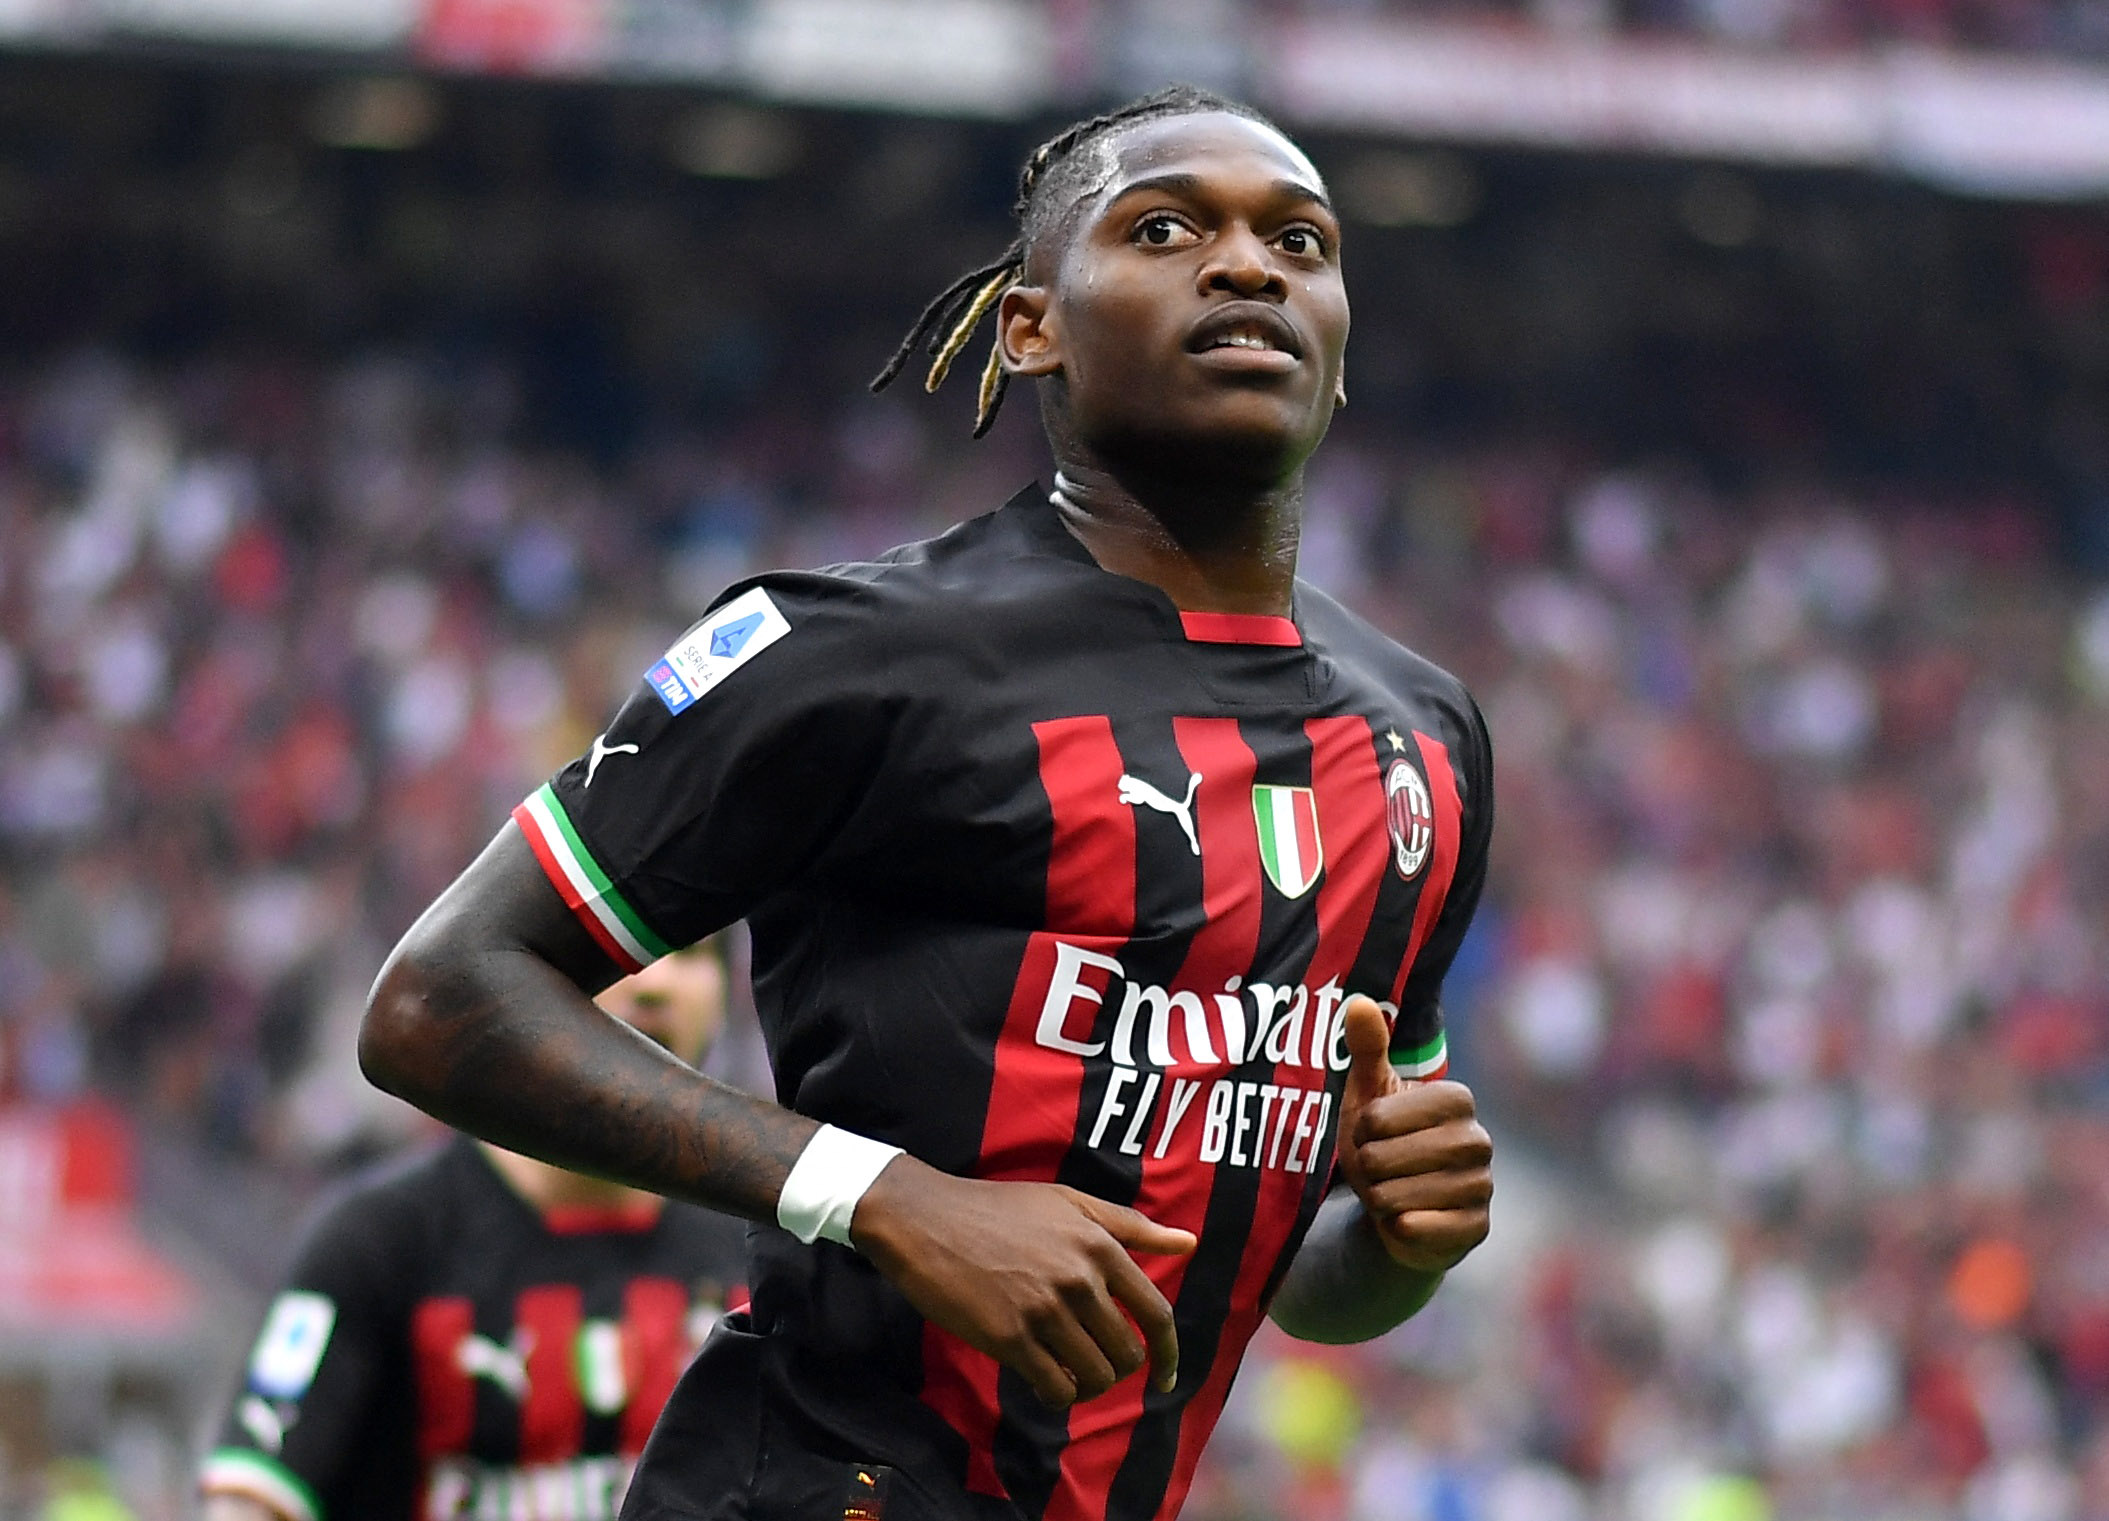 AC Milan will disappear due to the absence of Rafael Leao